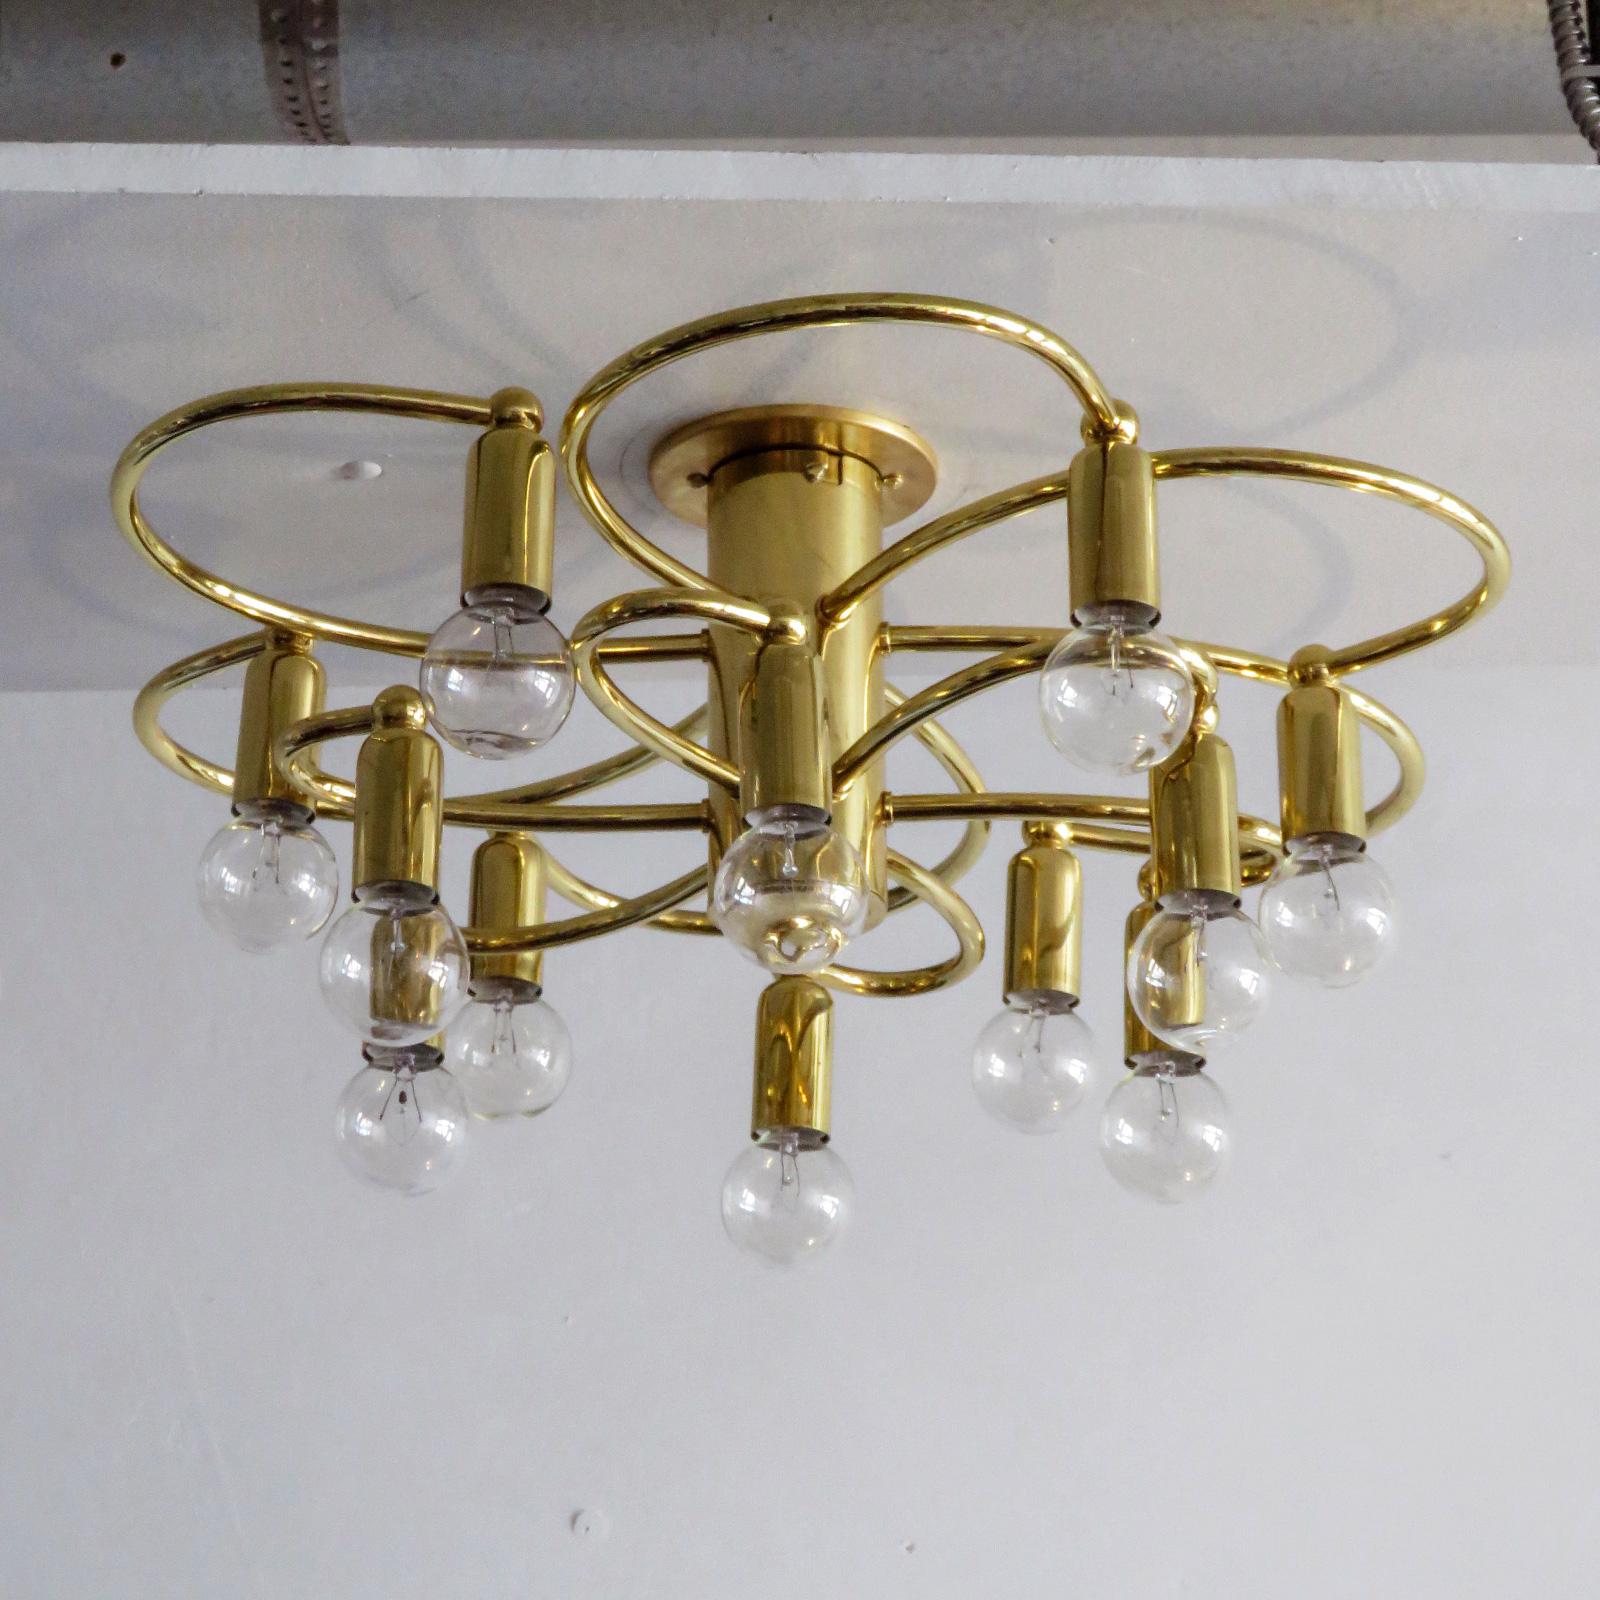 Stunning brass twelve-light flush mount ceiling light by Honsel, Germany with two tiers of six organically shaped arms, with a total of 12 sockets total, can be used as wall sconce as well, wired for US standards, twelve E12 sockets per fixture,